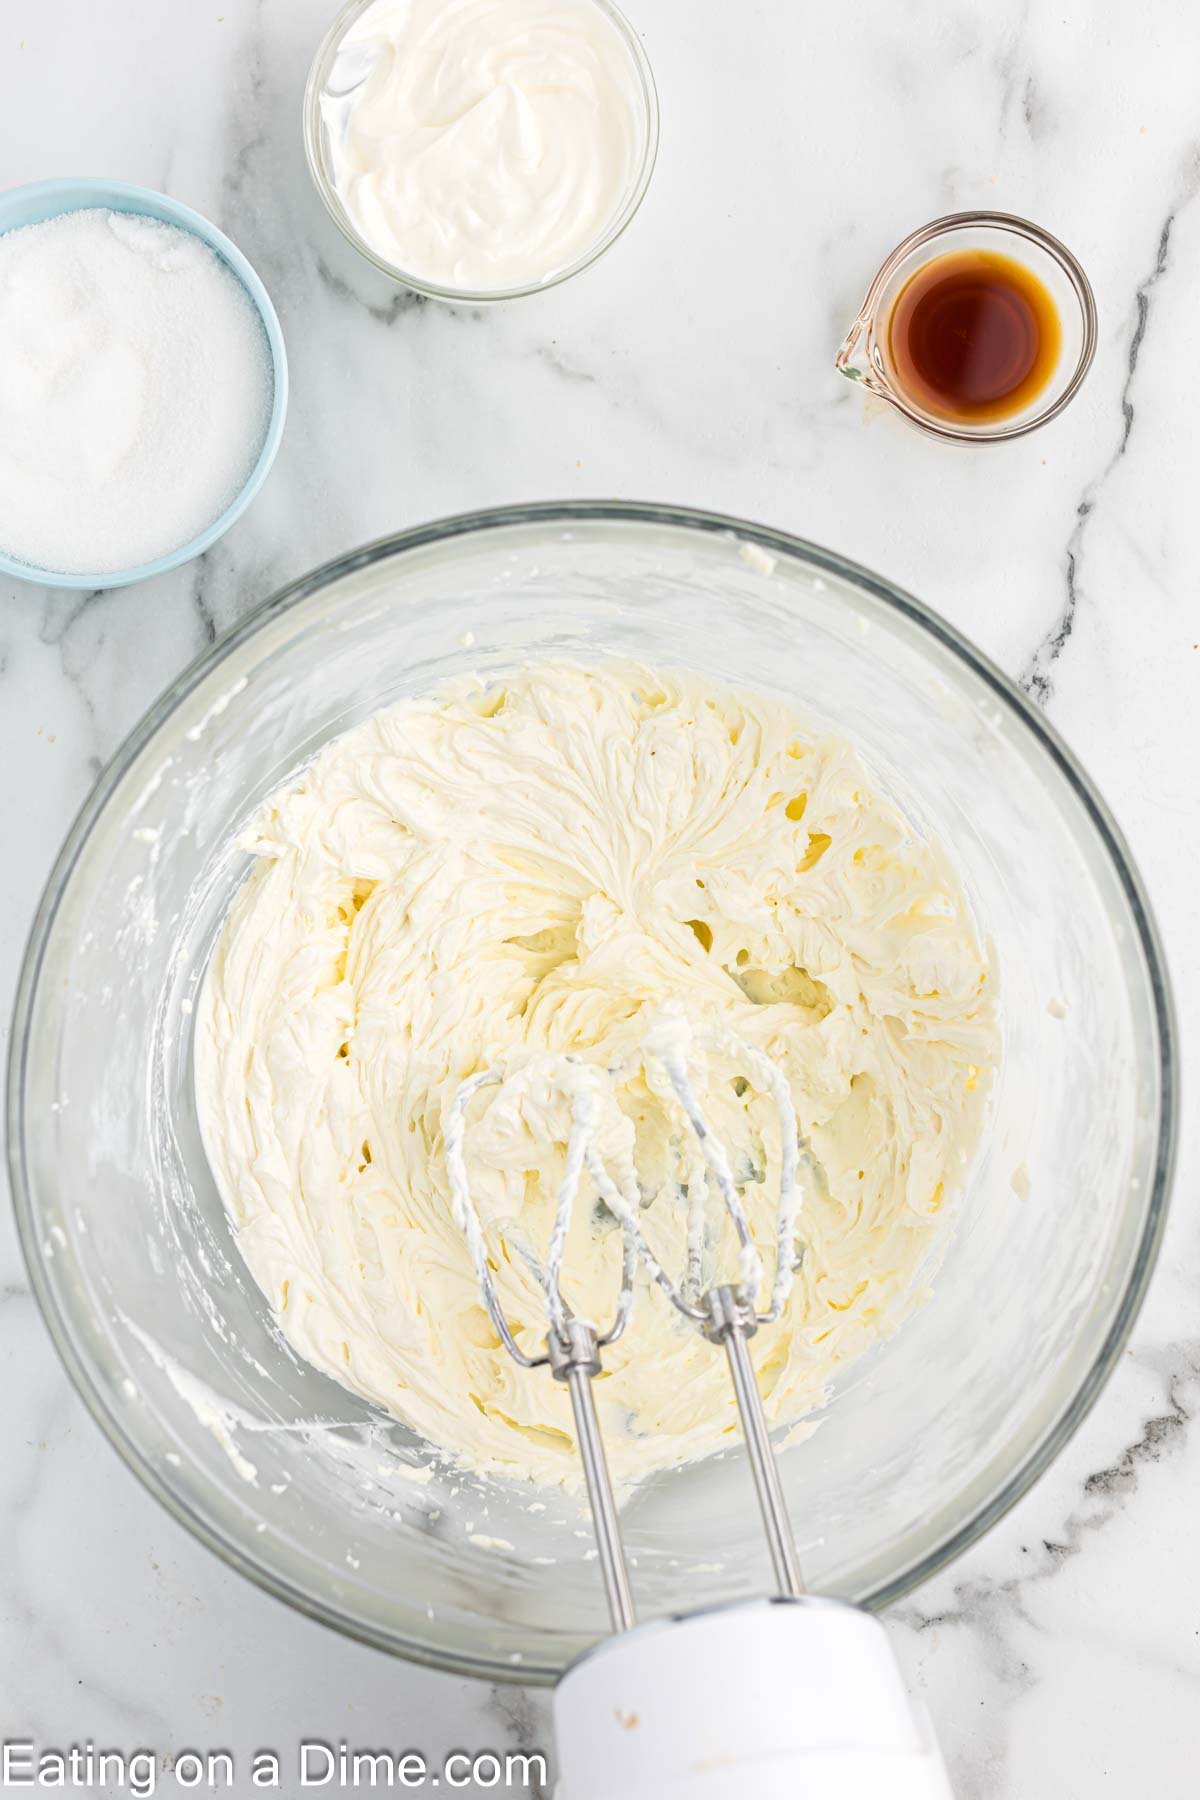 Beating the cream cheese with a hand mixer